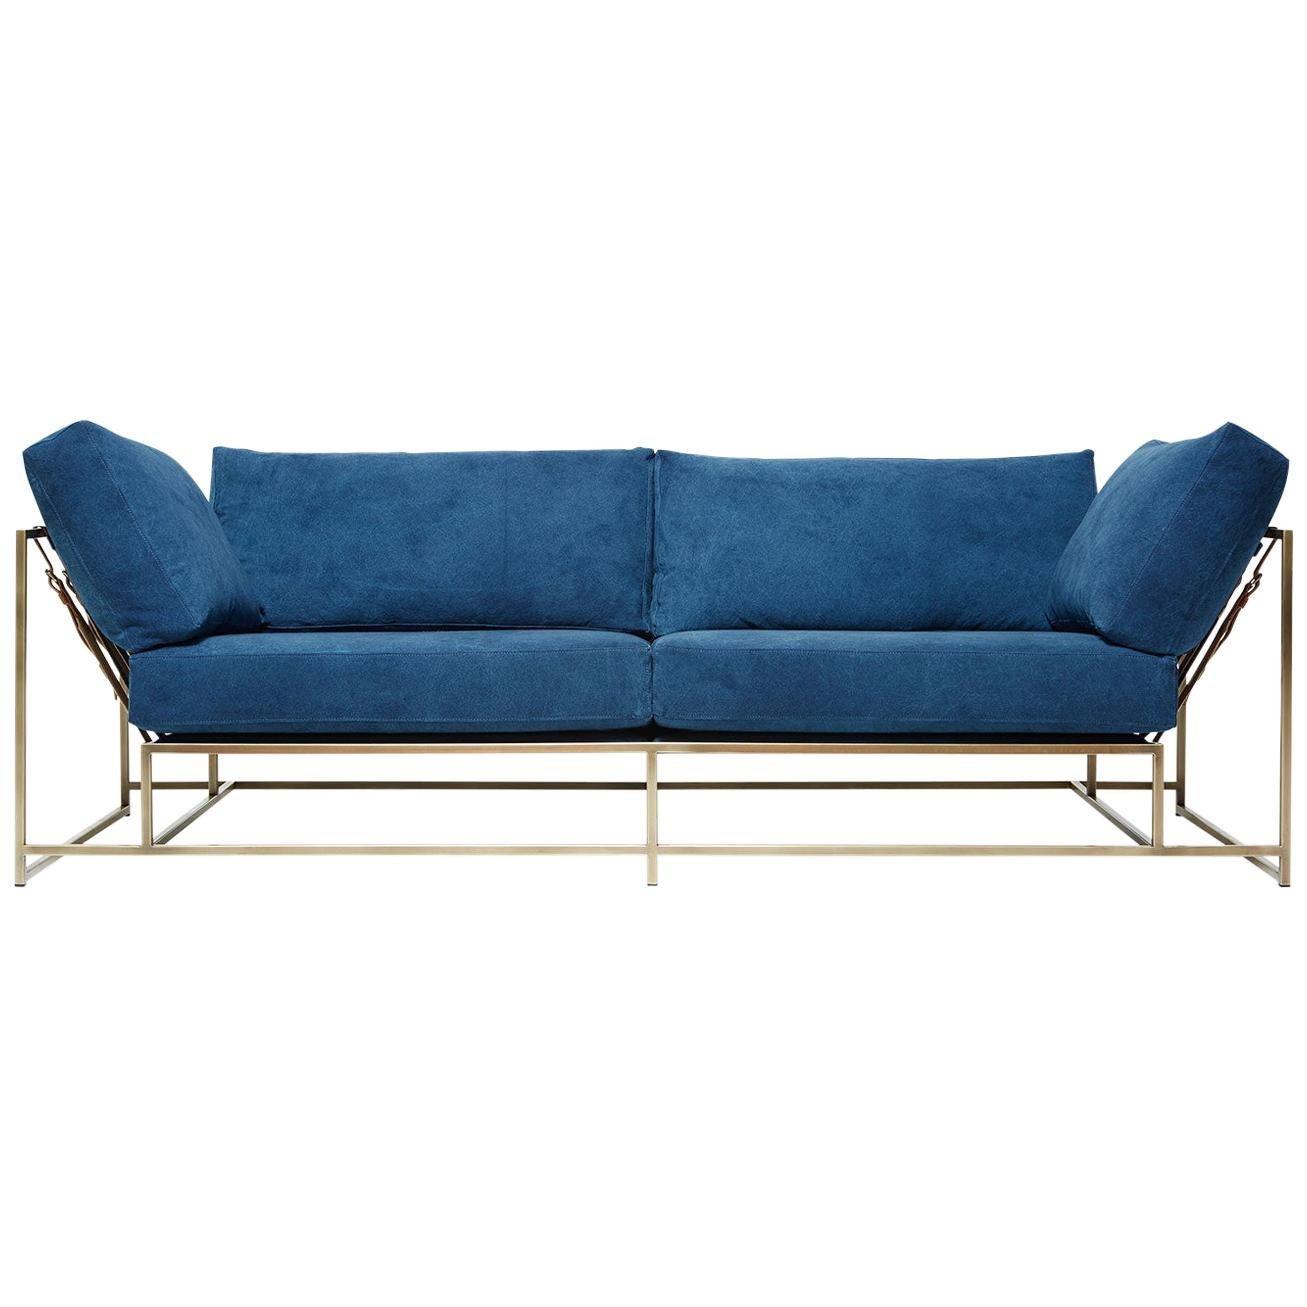 Hand-Dyed Indigo Canvas and Antique Brass Two-Seat Sofa